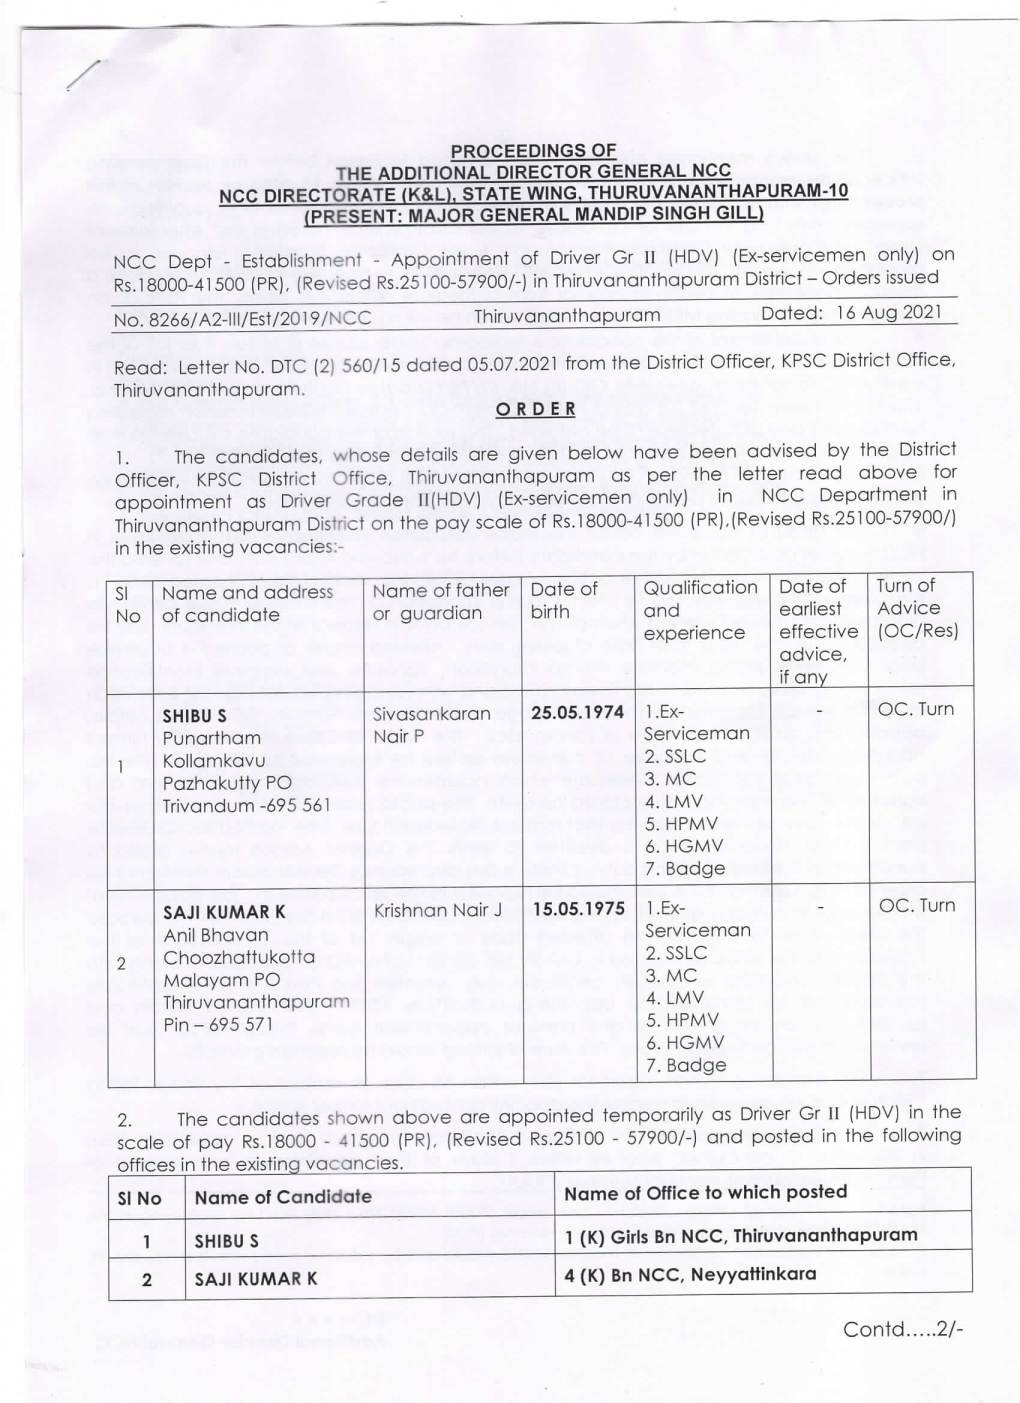 Appointment of Driver Gd-Ii Trivandrum District